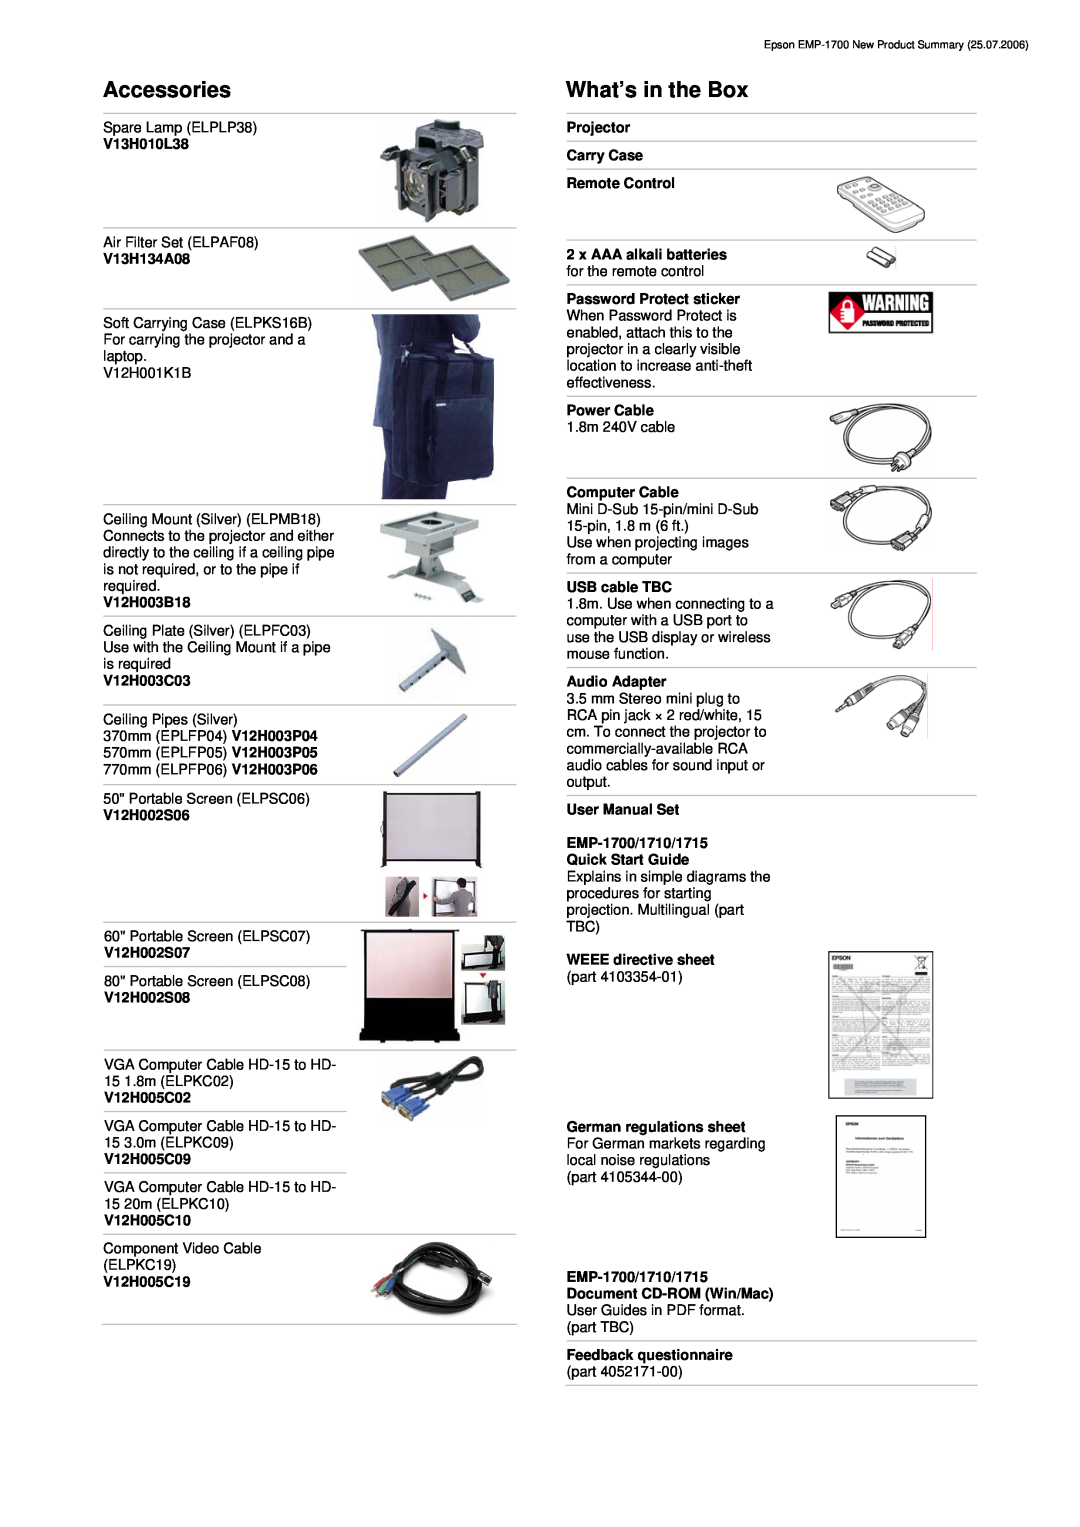 Epson EMP-1700 warranty Accessories, What’s in the Box 